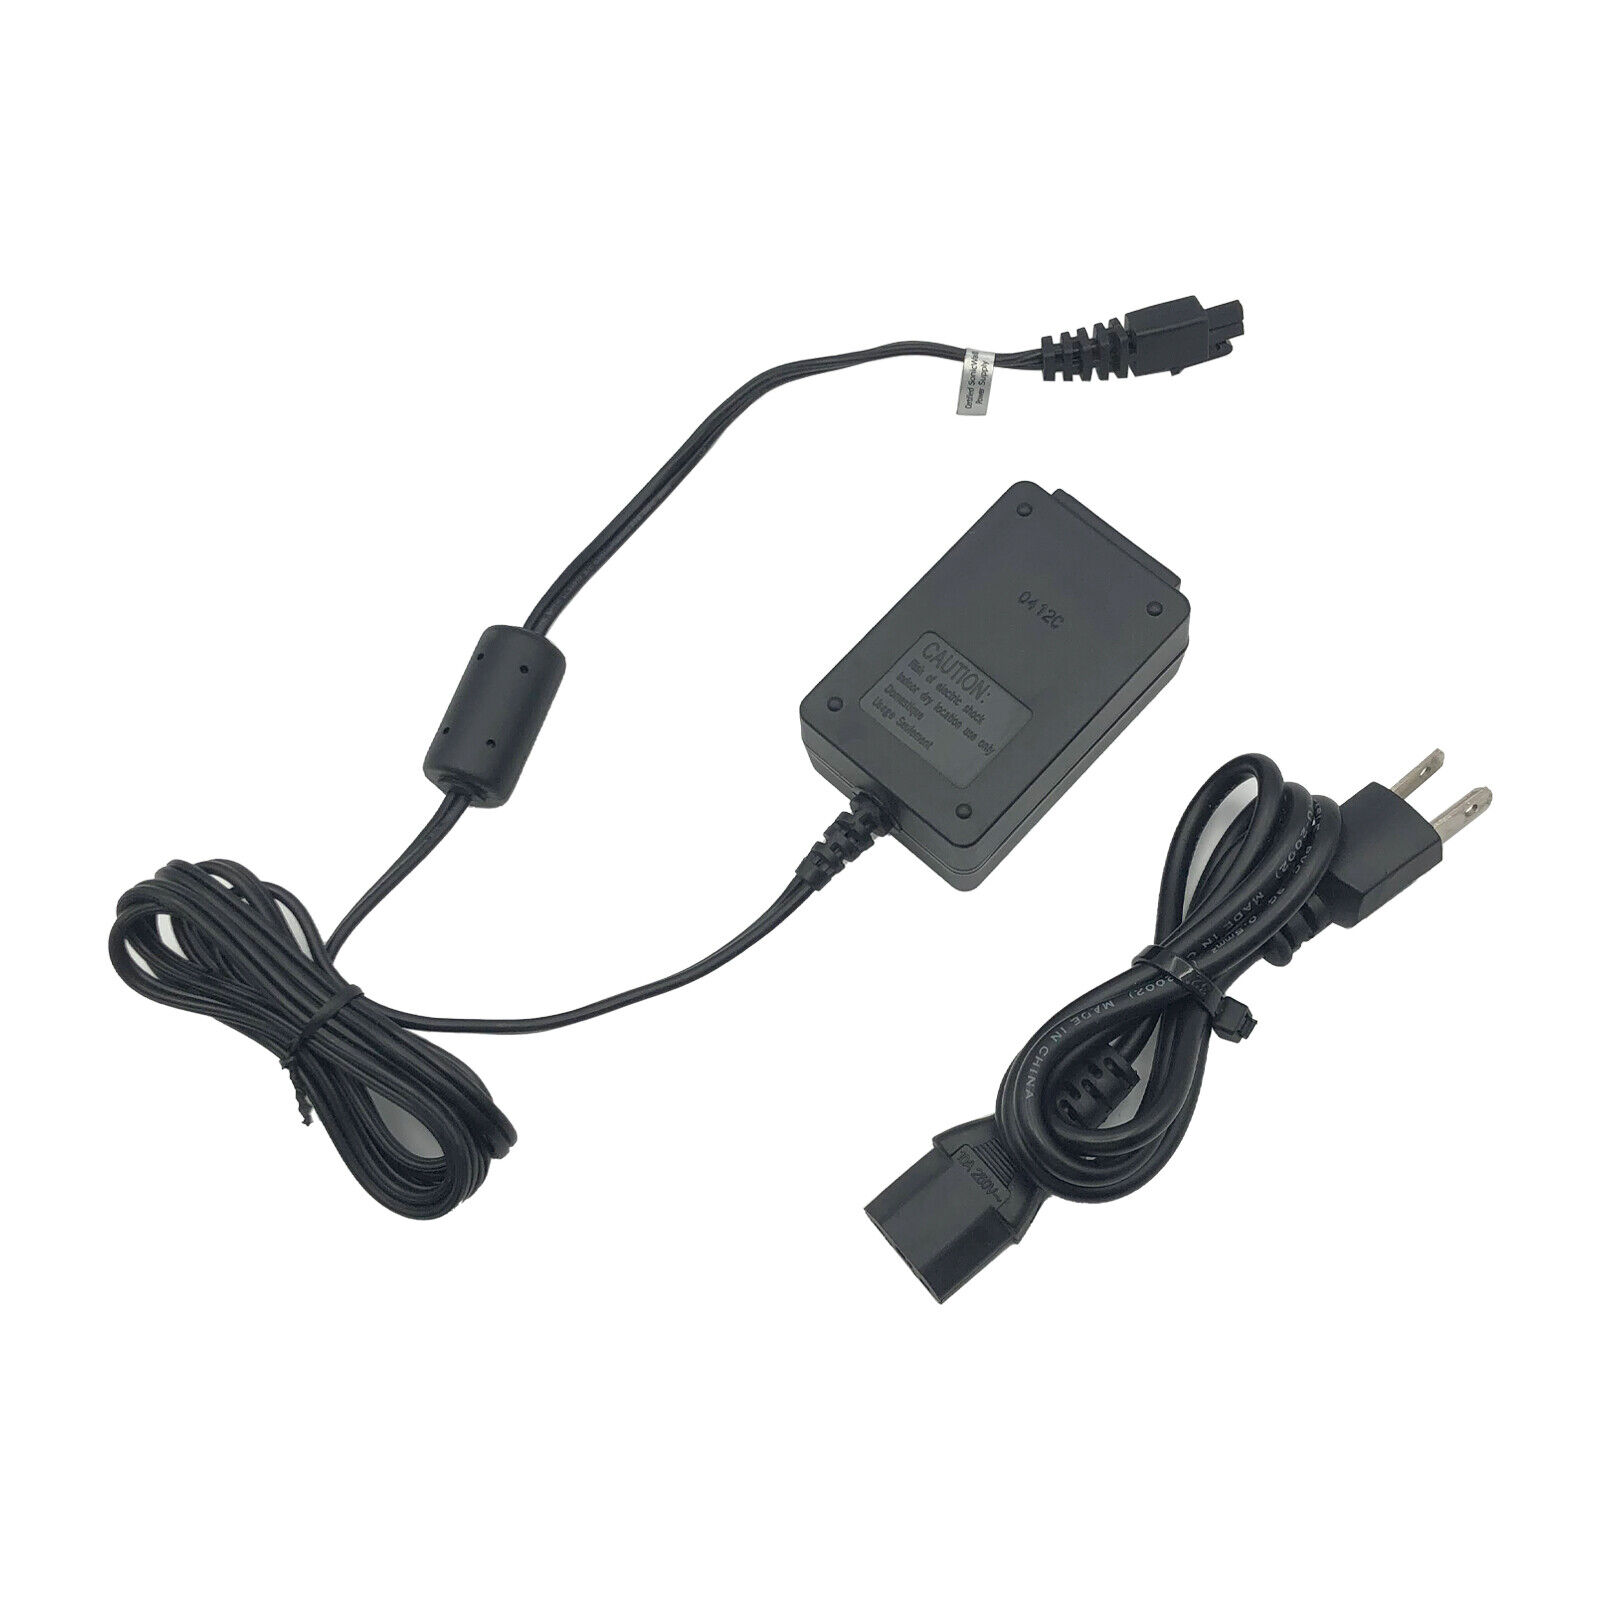 *Brand NEW*for SonicWALL Tz105 TZ 105 Apl22-09b w/Cord Genuine Sino-American AC Adapter